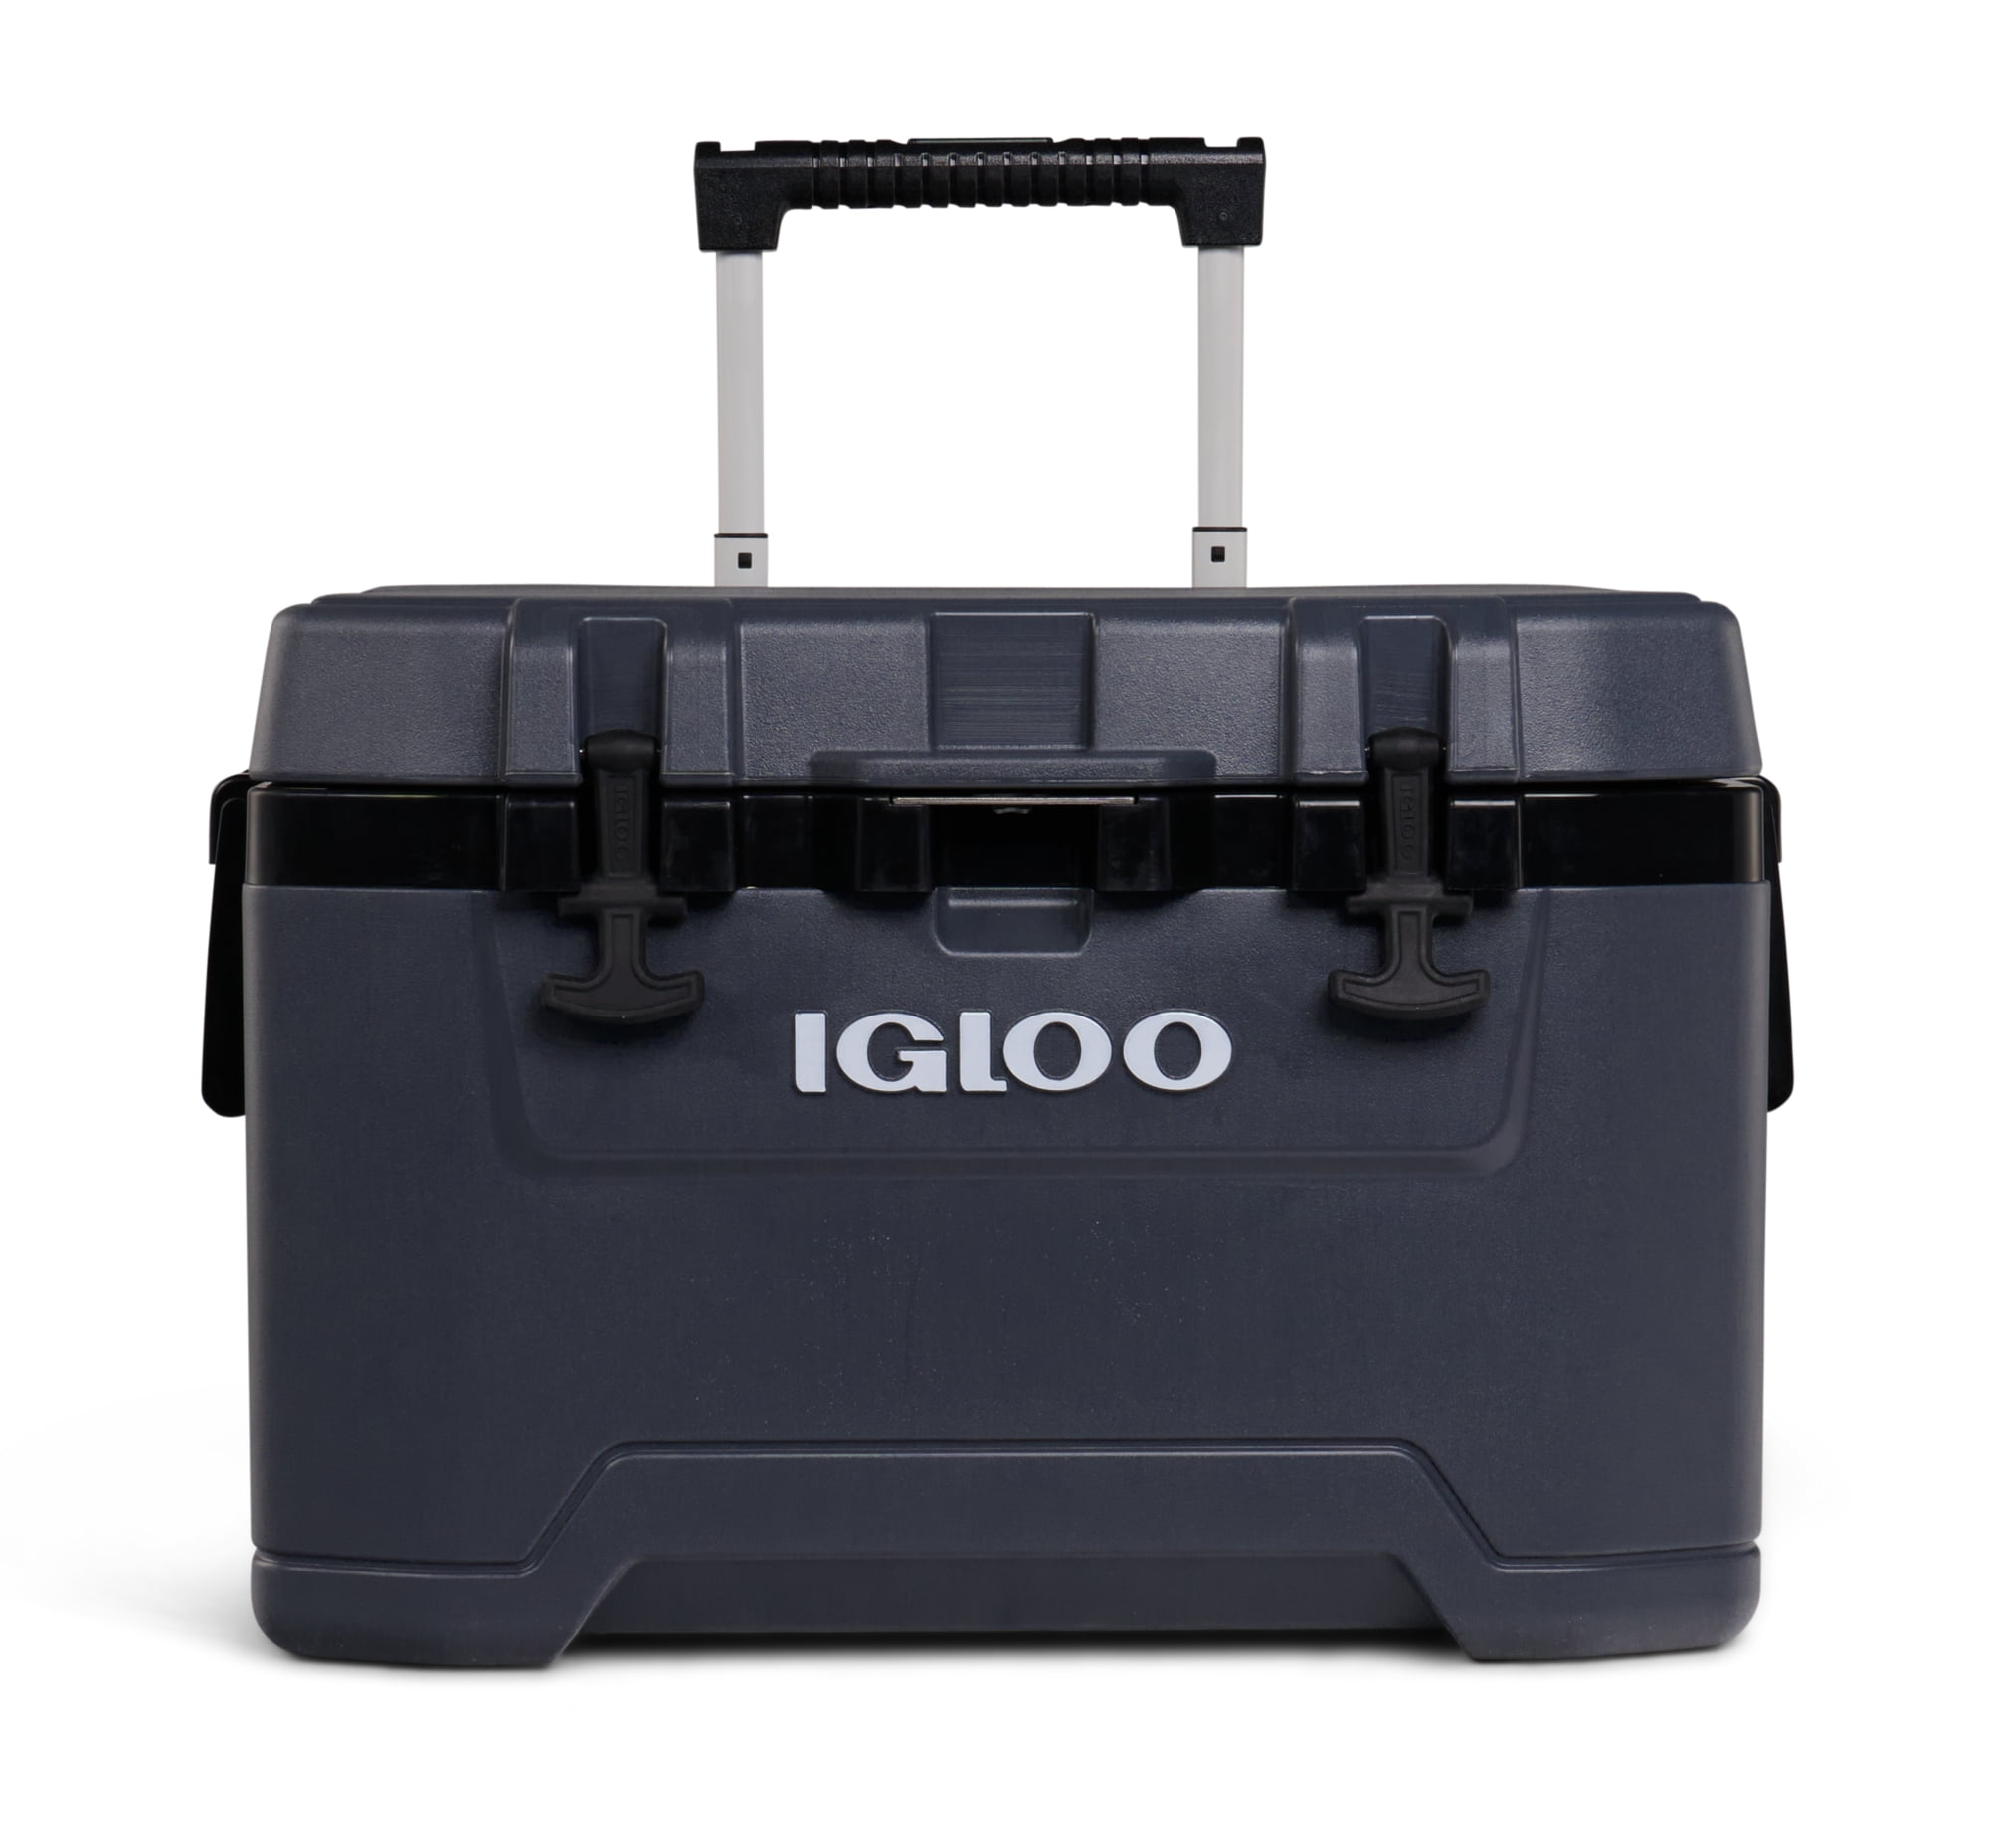 Igloo Overland 52 Qt Ice Chest Cooler with Wheels, Gray